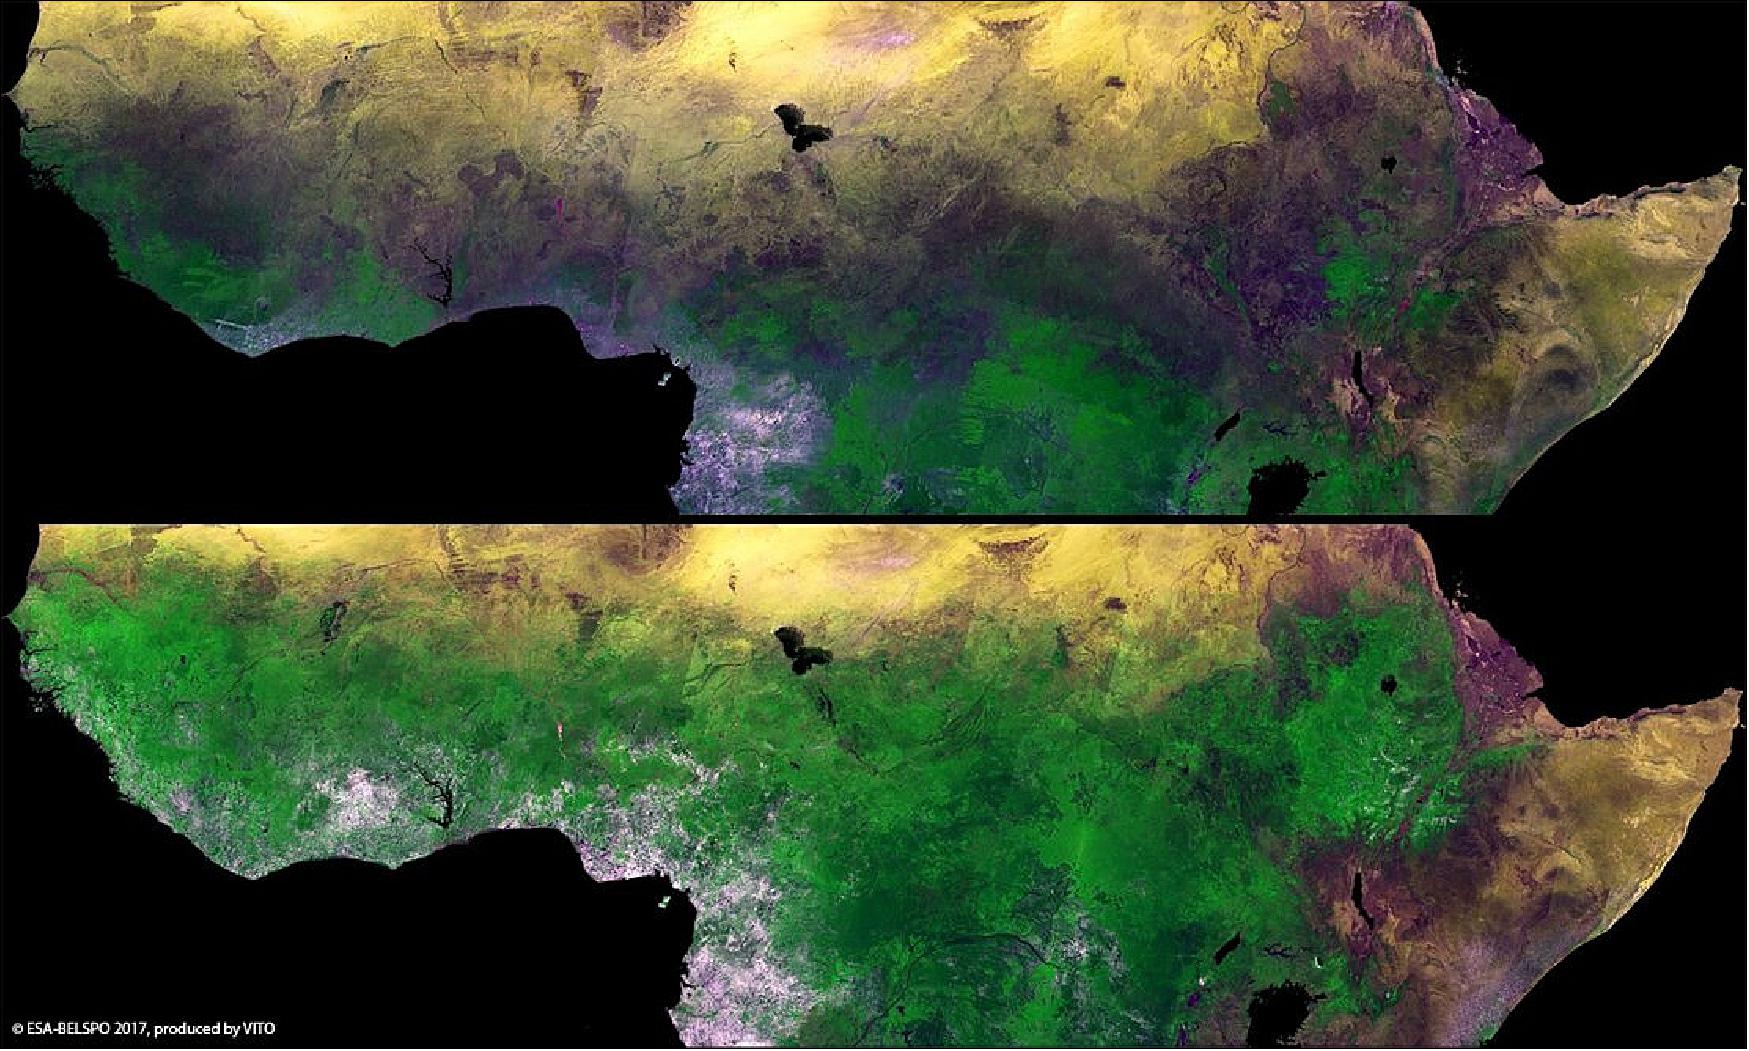 Figure 35: Technology image of the week: ESA's Proba-V minisatellite shows vegetation bloom across the African Sahel with the coming of the rainy season (image credit: ESA/Belspo – produced by VITO)